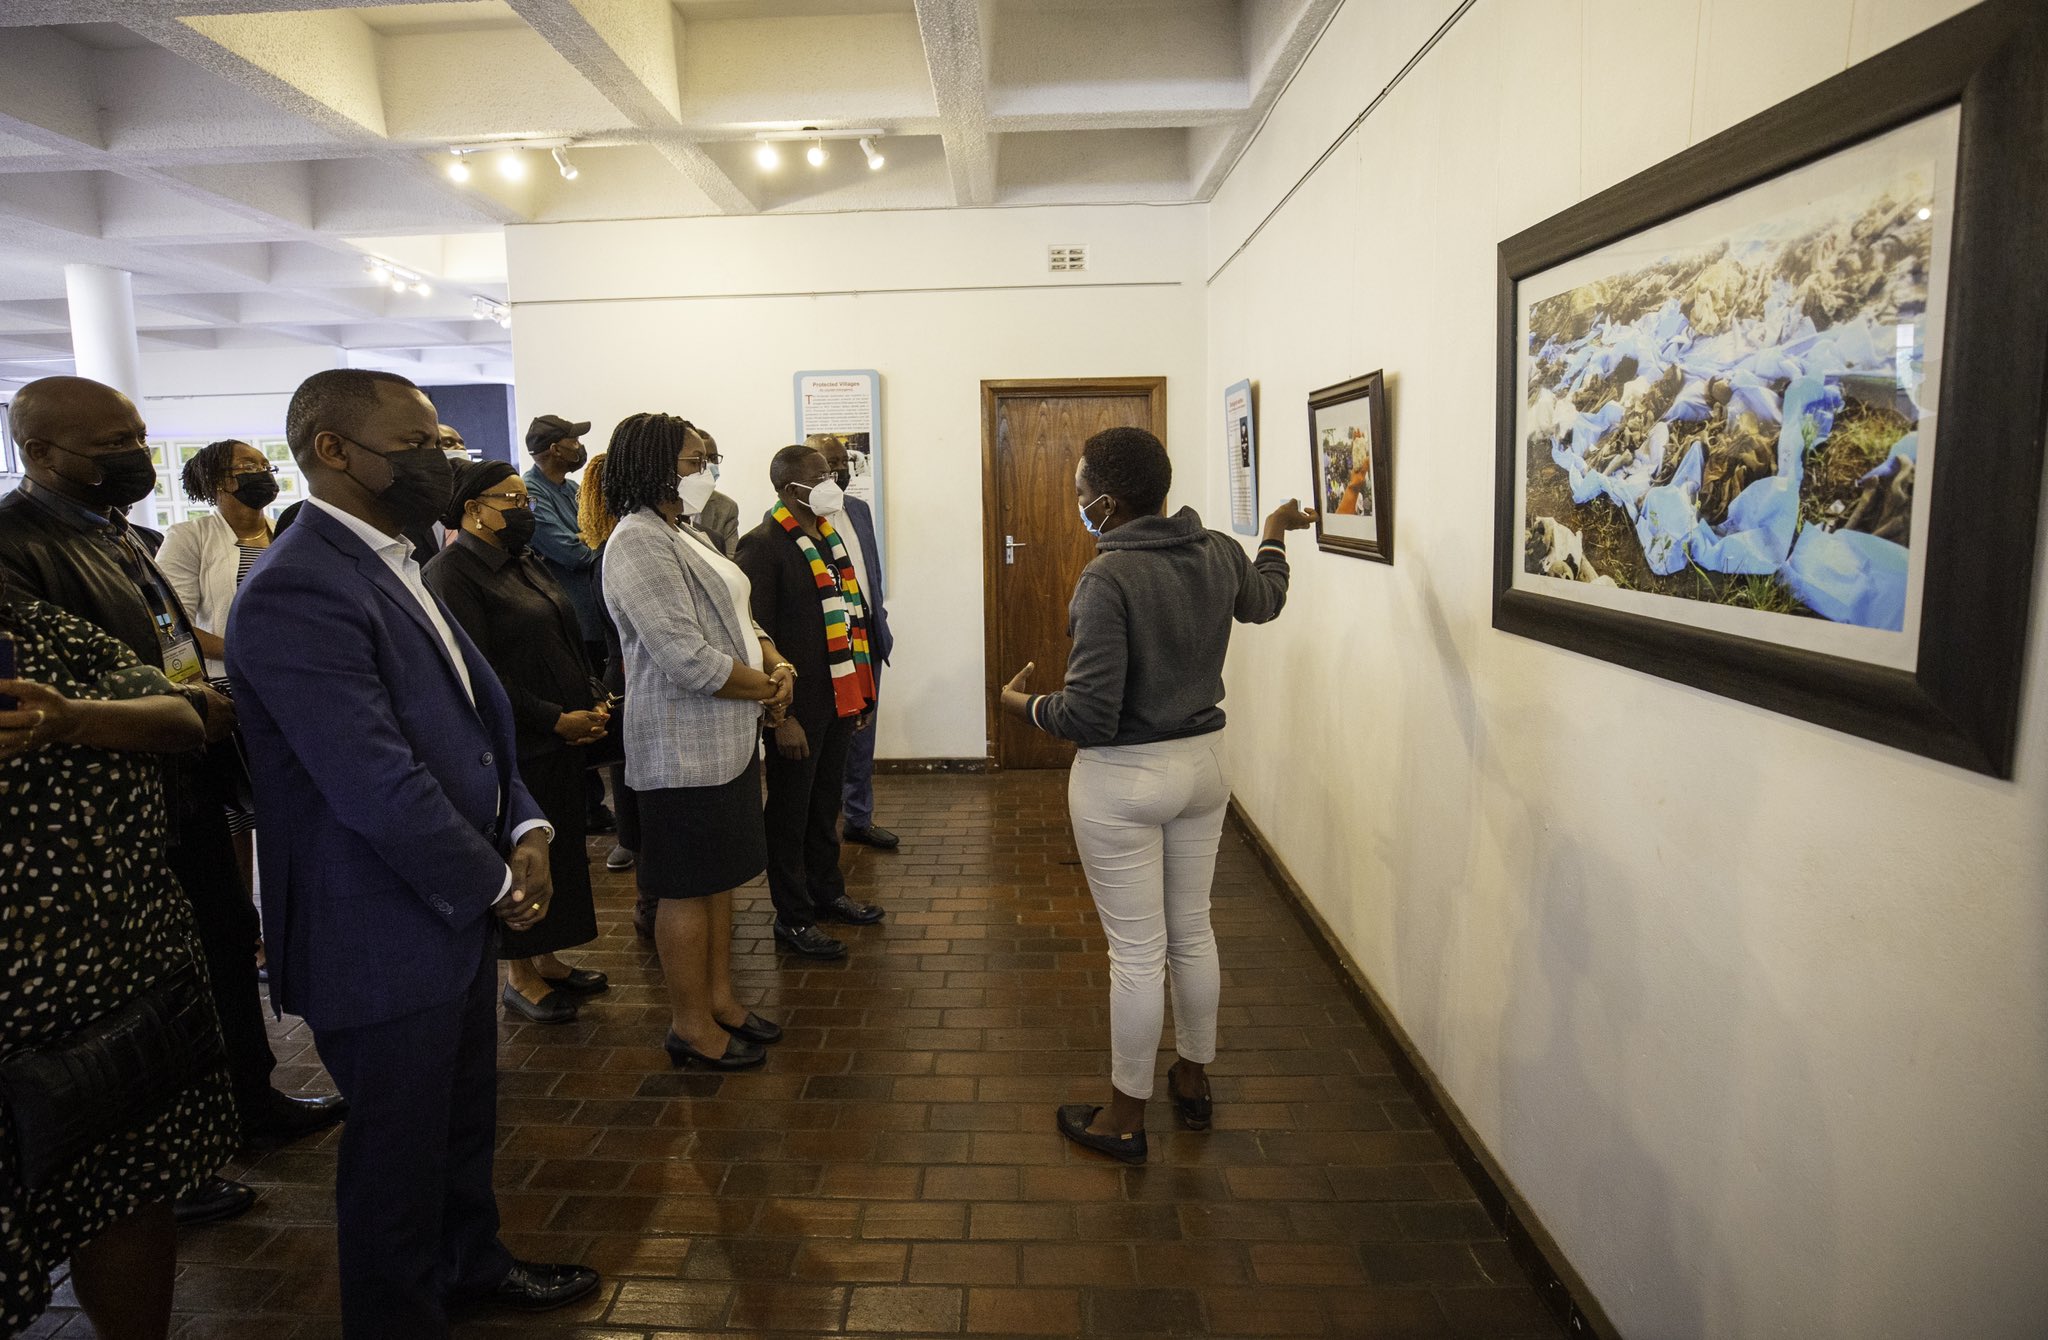 A delegation from Rwanda  visited the Chibondo Genocide Museum & the National Heroes Acre to learn about Zimbabweu2019s liberation history. They are there ahead of the Zimbabwe-Rwanda Trade and Investment conference on March 28.